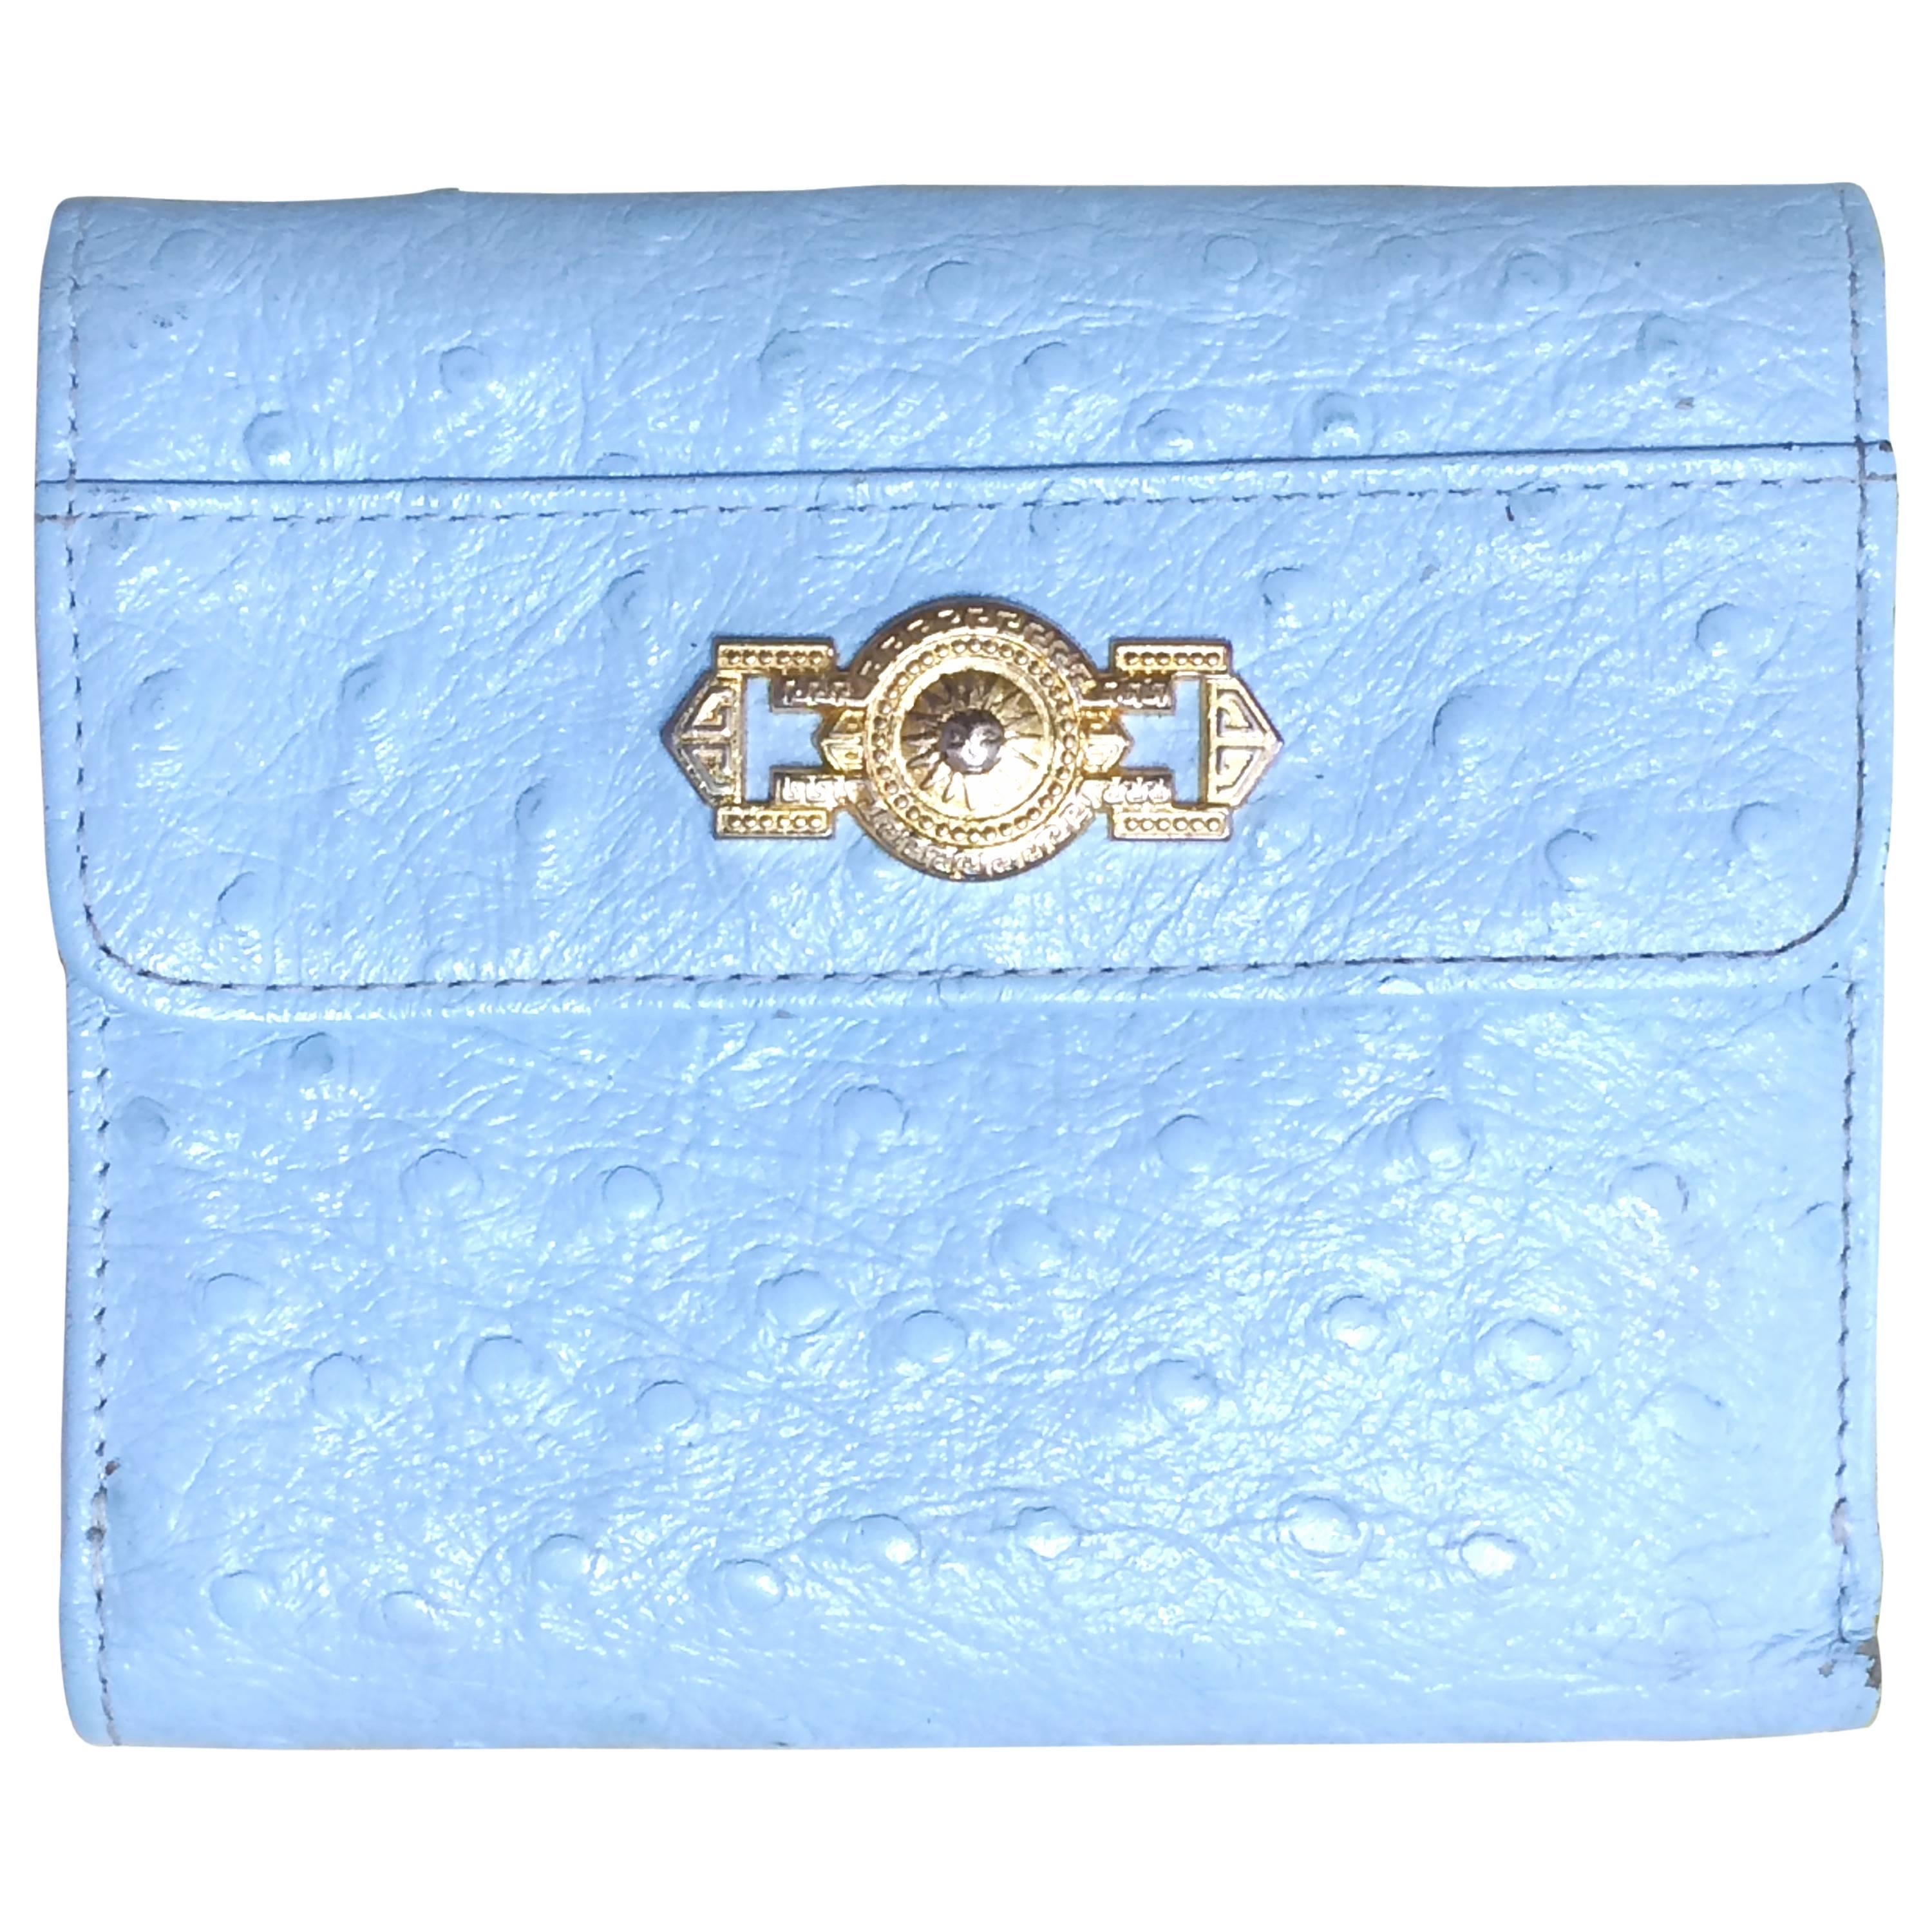 Vintage Gianni Versace ostrich-embossed light blue leather wallet with sunburst For Sale